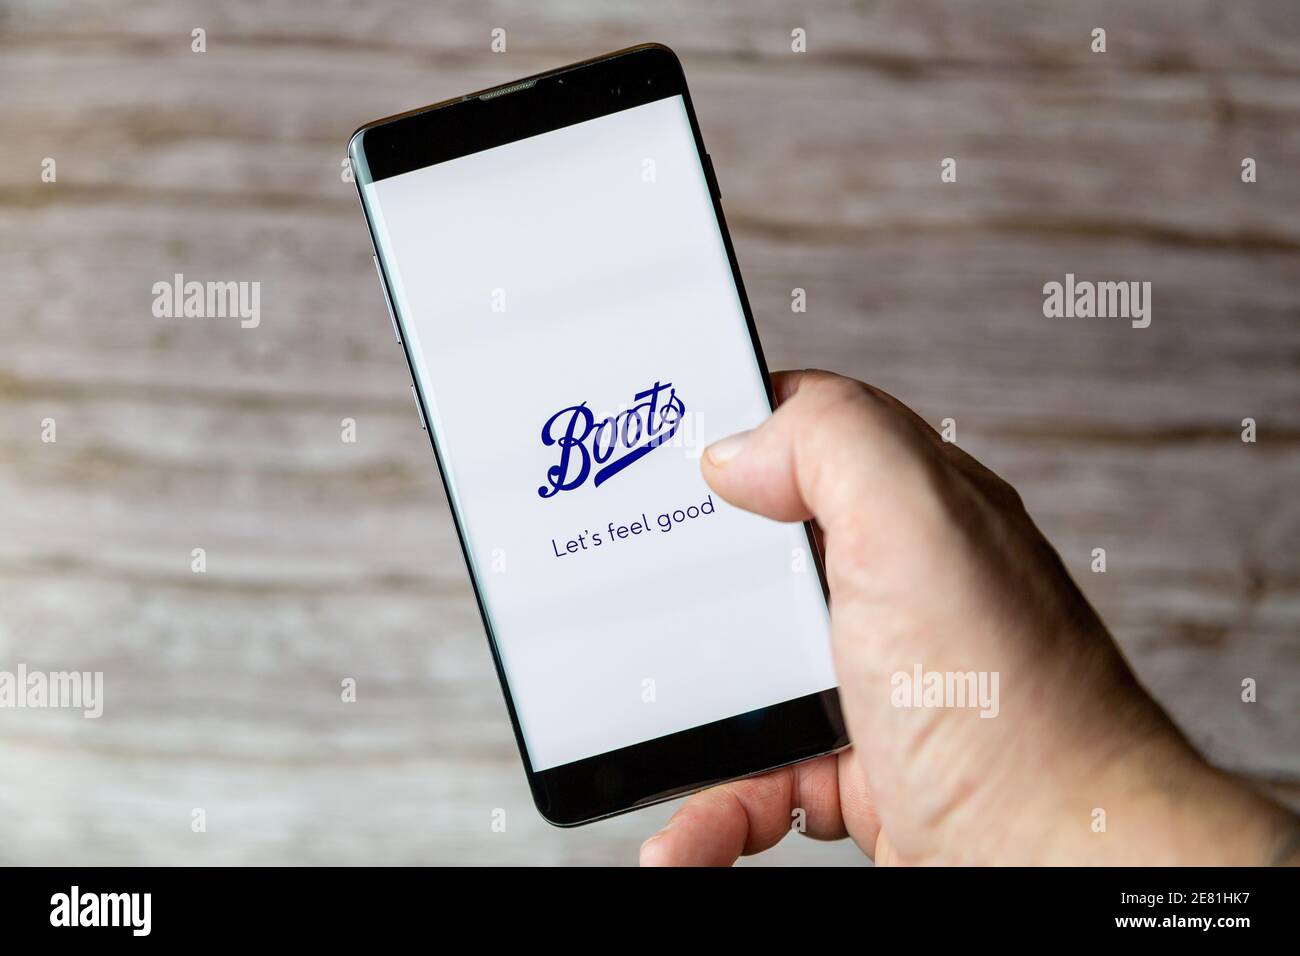 Boots Logo High Resolution Stock Photography and Images - Alamy